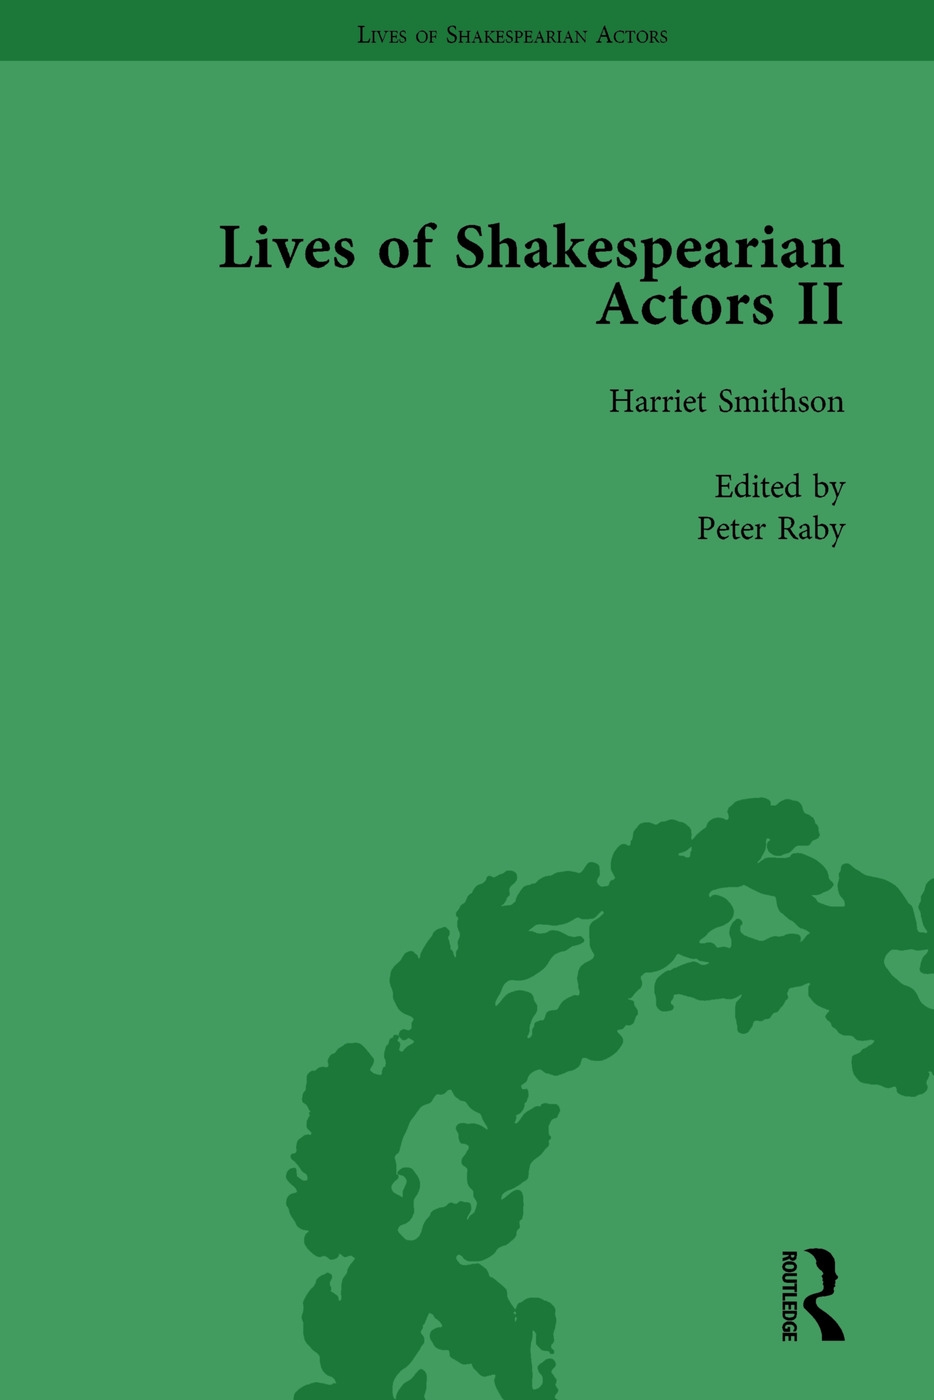 Lives of Shakespearian Actors, Part II, Volume 3: Edmund Kean, Sarah Siddons and Harriet Smithson by Their Contemporaries